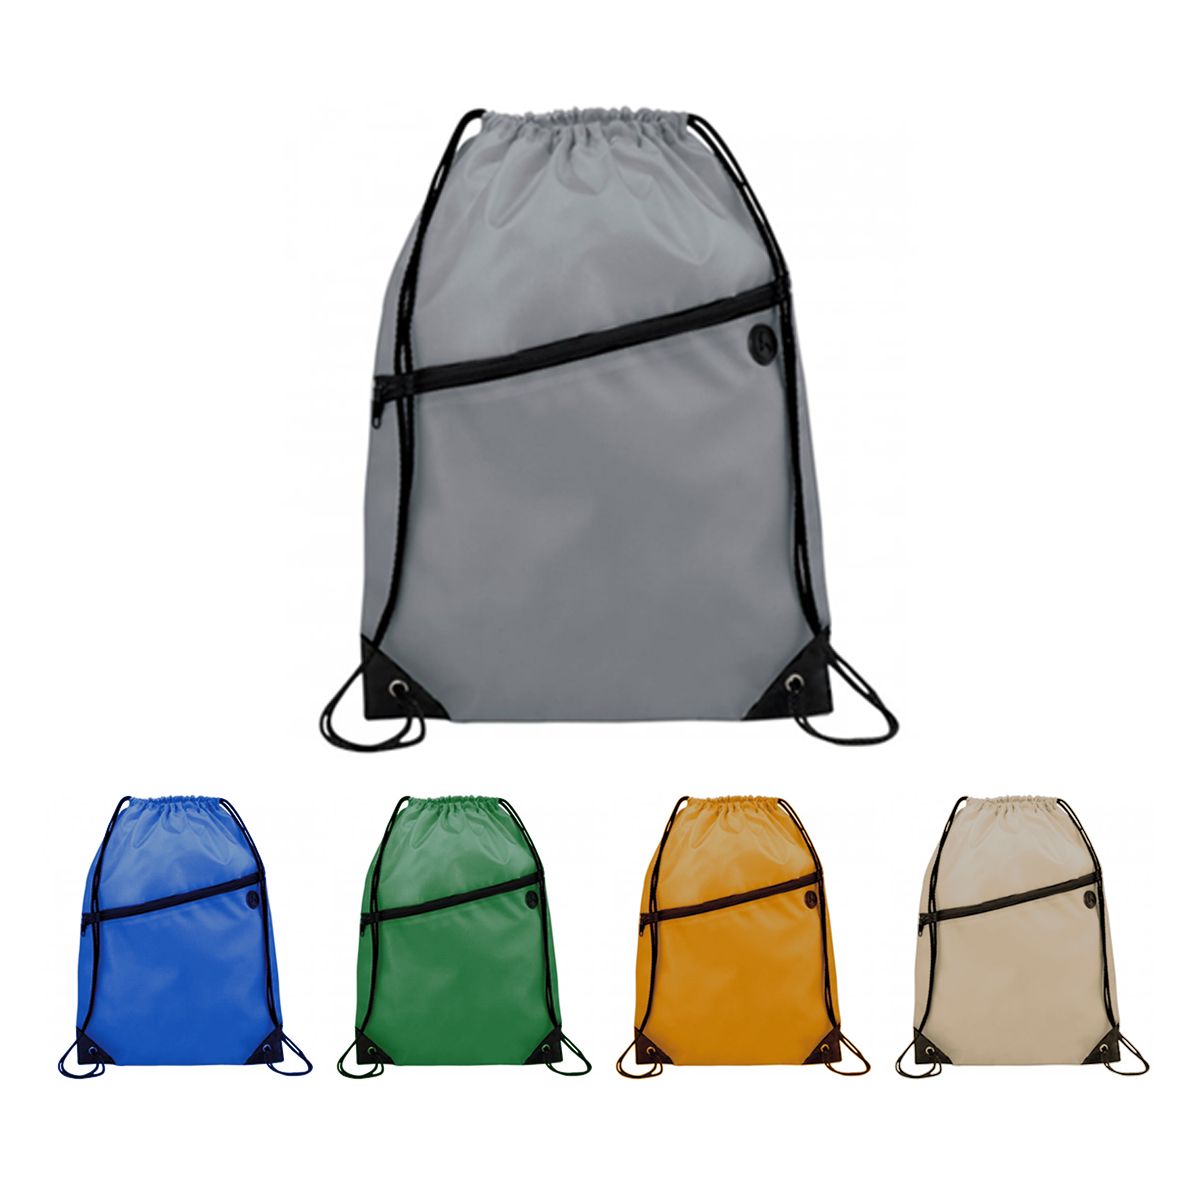 Drawstring Bag with Compartment